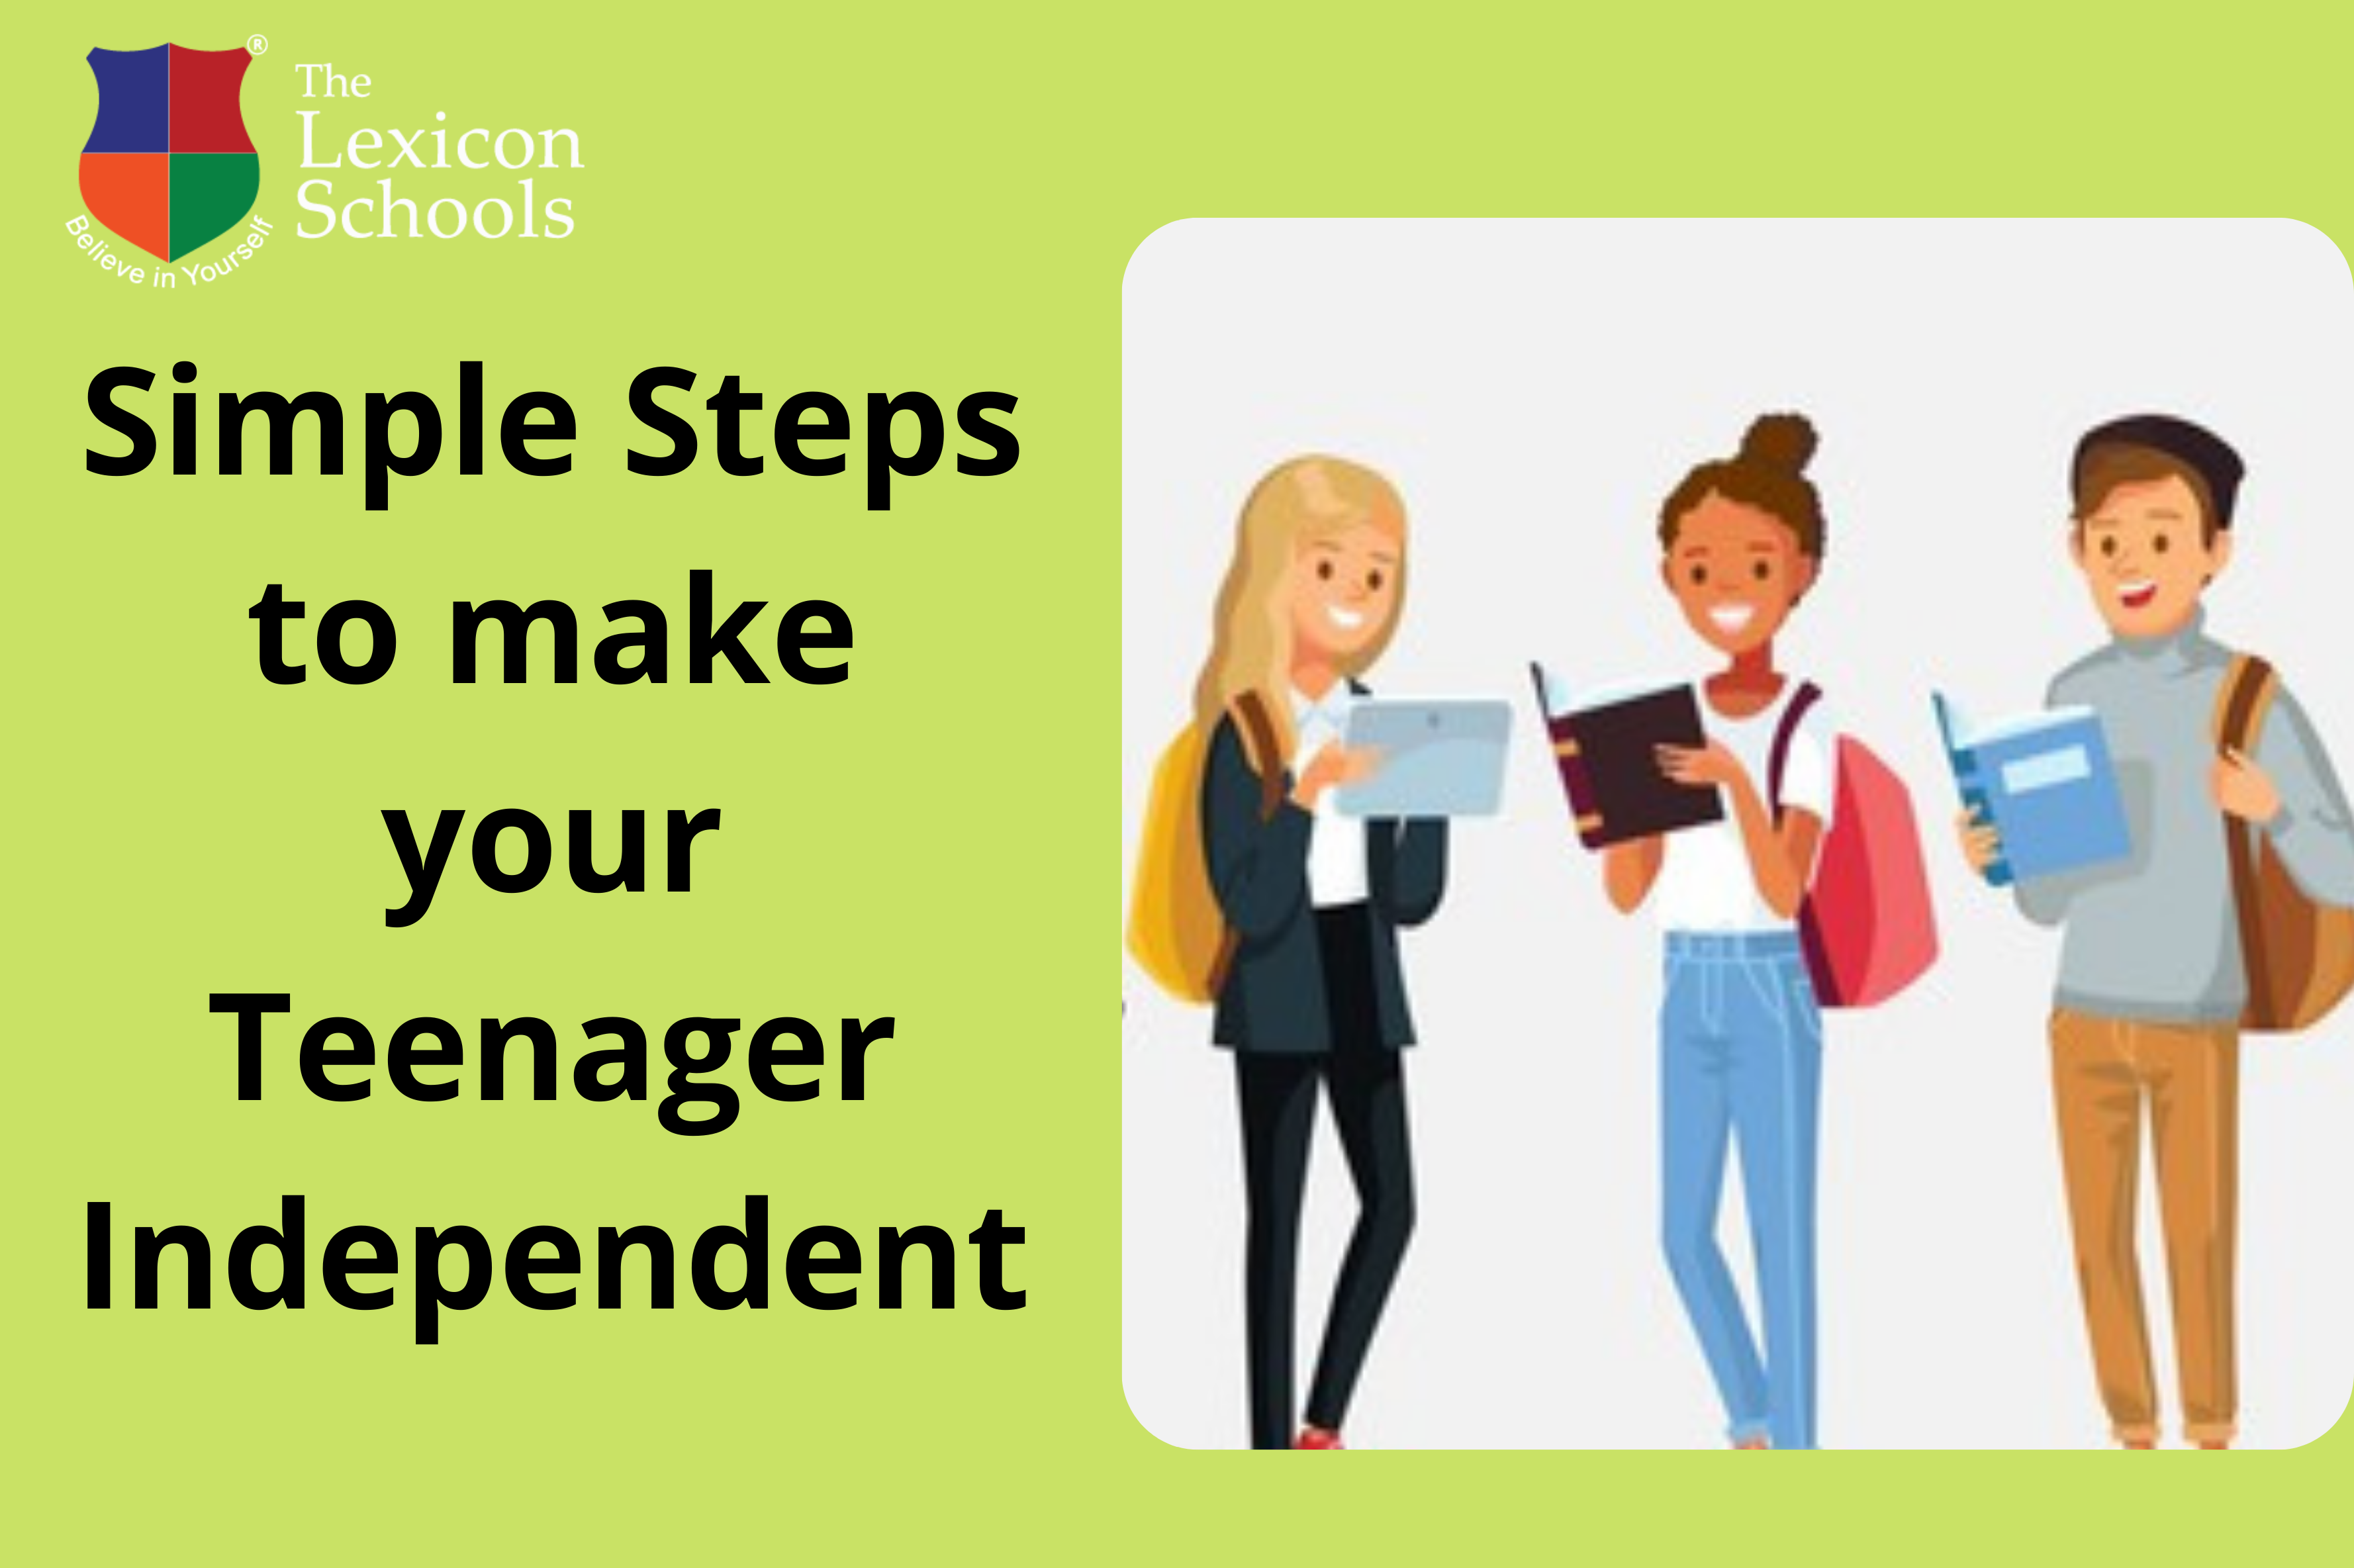 Simple Steps to make your Teenager Independent